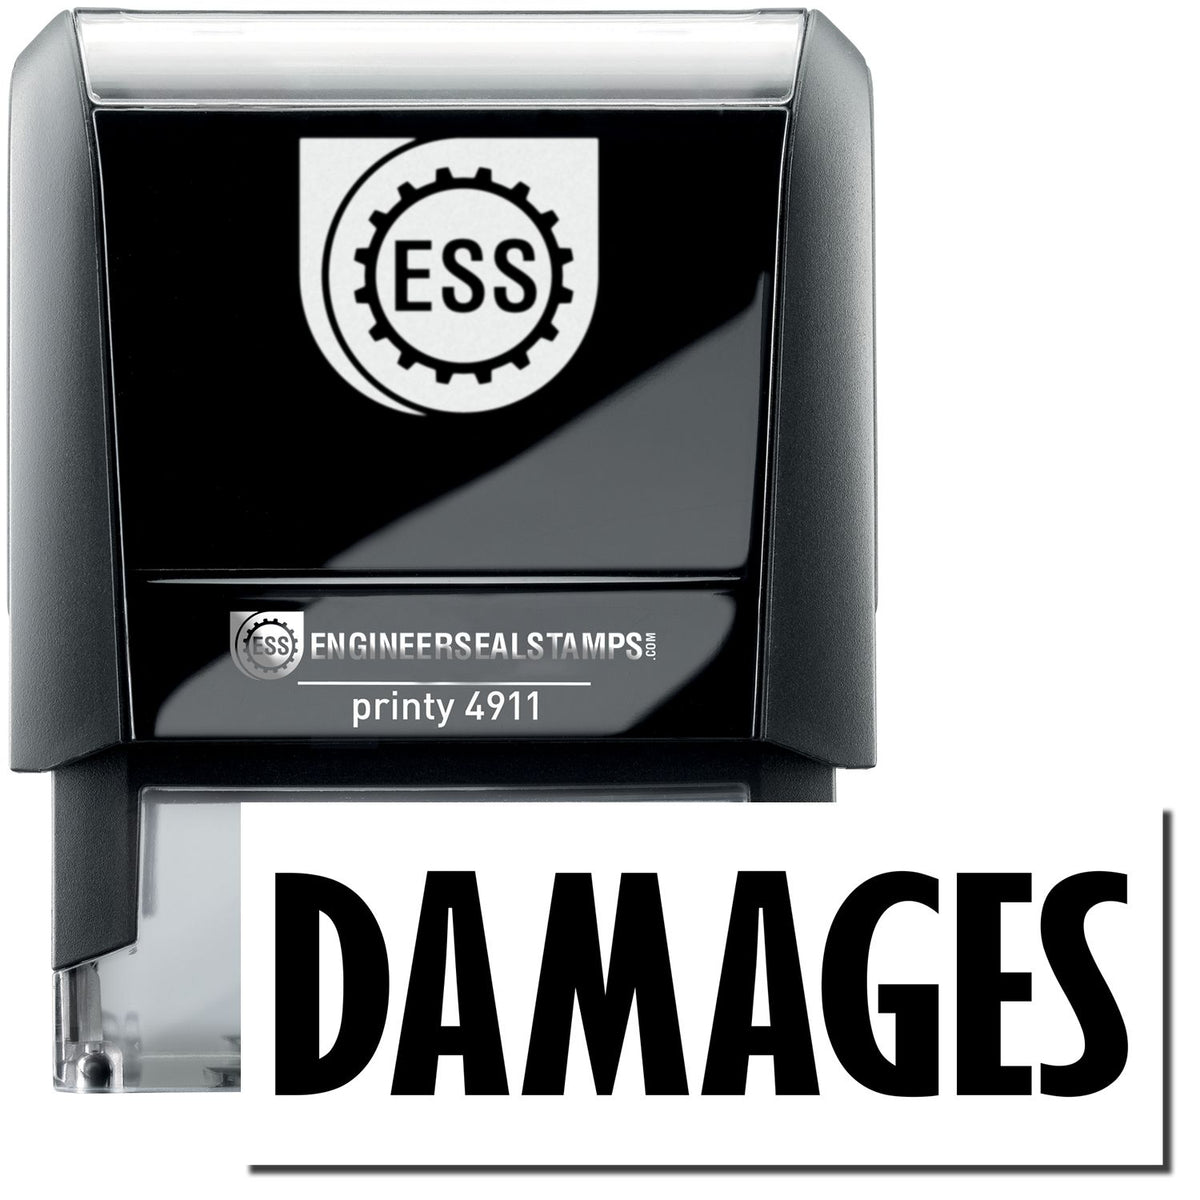 A self-inking stamp with a stamped image showing how the text &quot;DAMAGES&quot; is displayed after stamping.